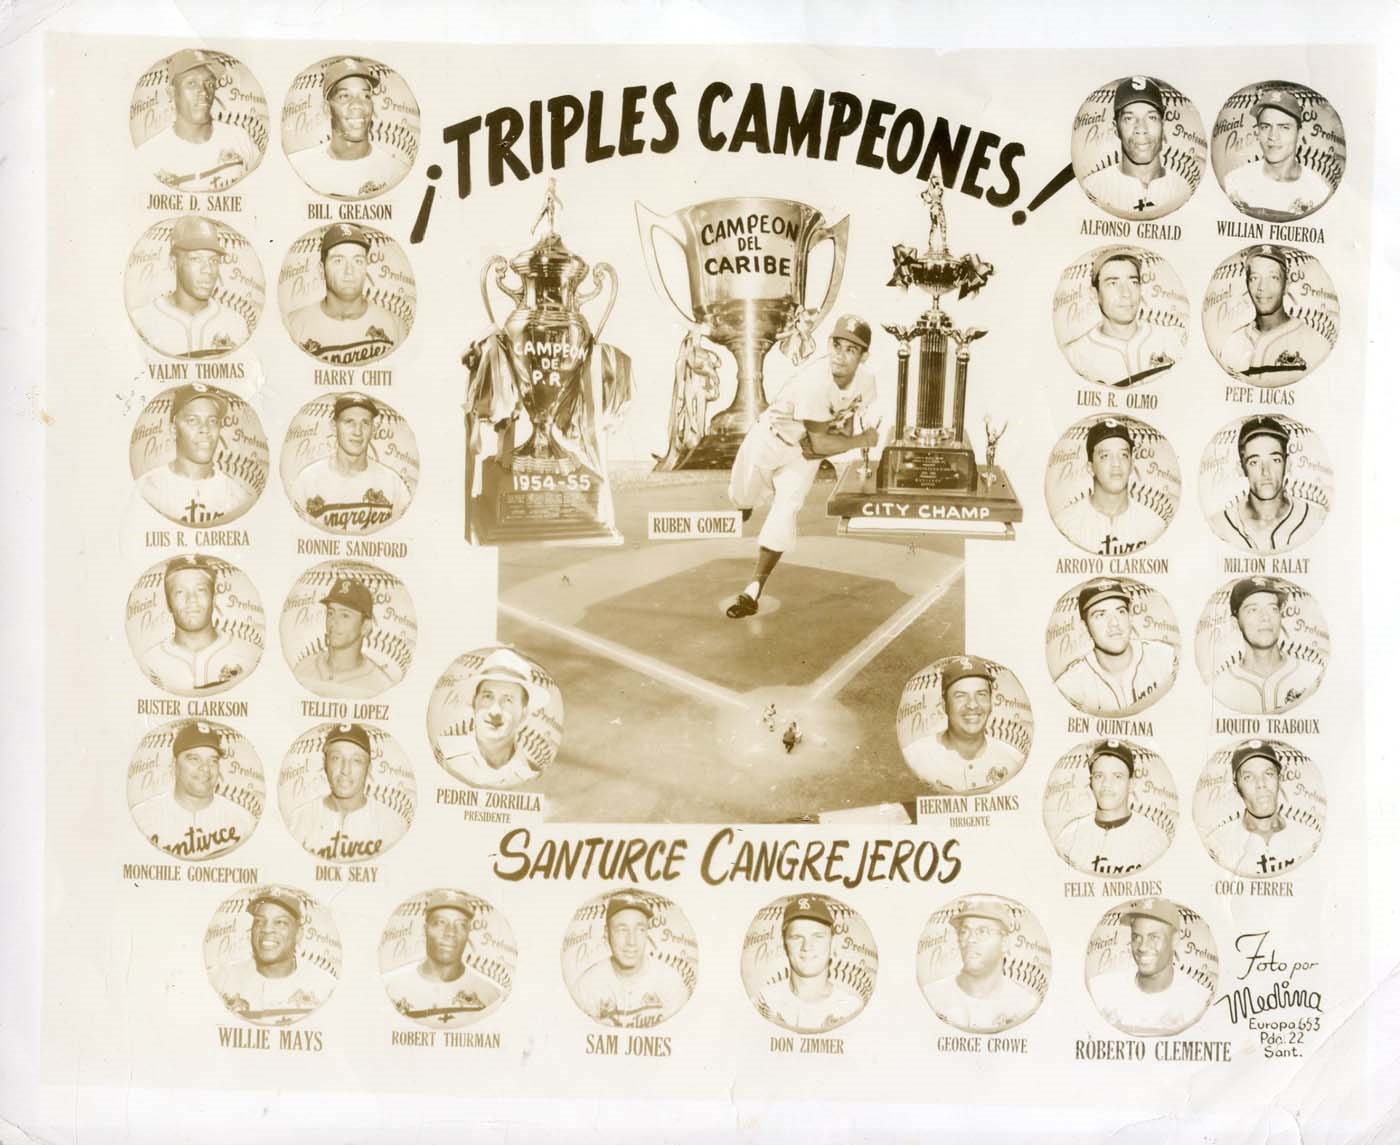 - 1954-55 Santurce Cangrejeros Championship Team Photo with Clemente and Mays